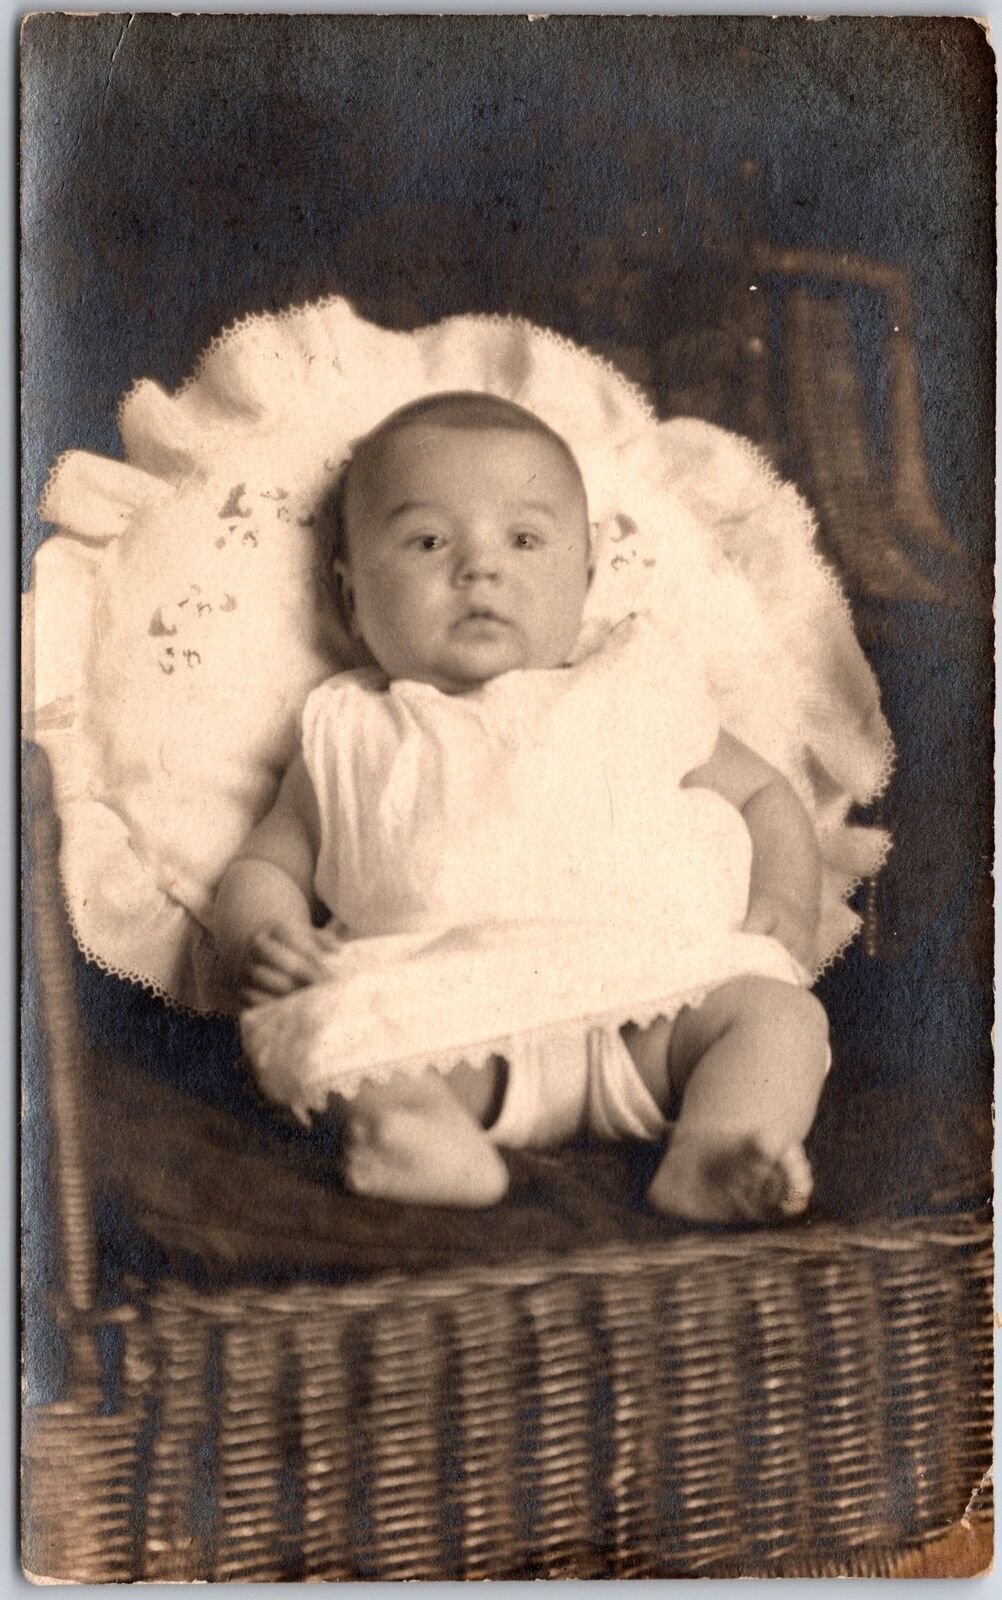 Baby Infant Photograph Lying in Round Pillow Cute Chubby Cheek RPPC Postcard